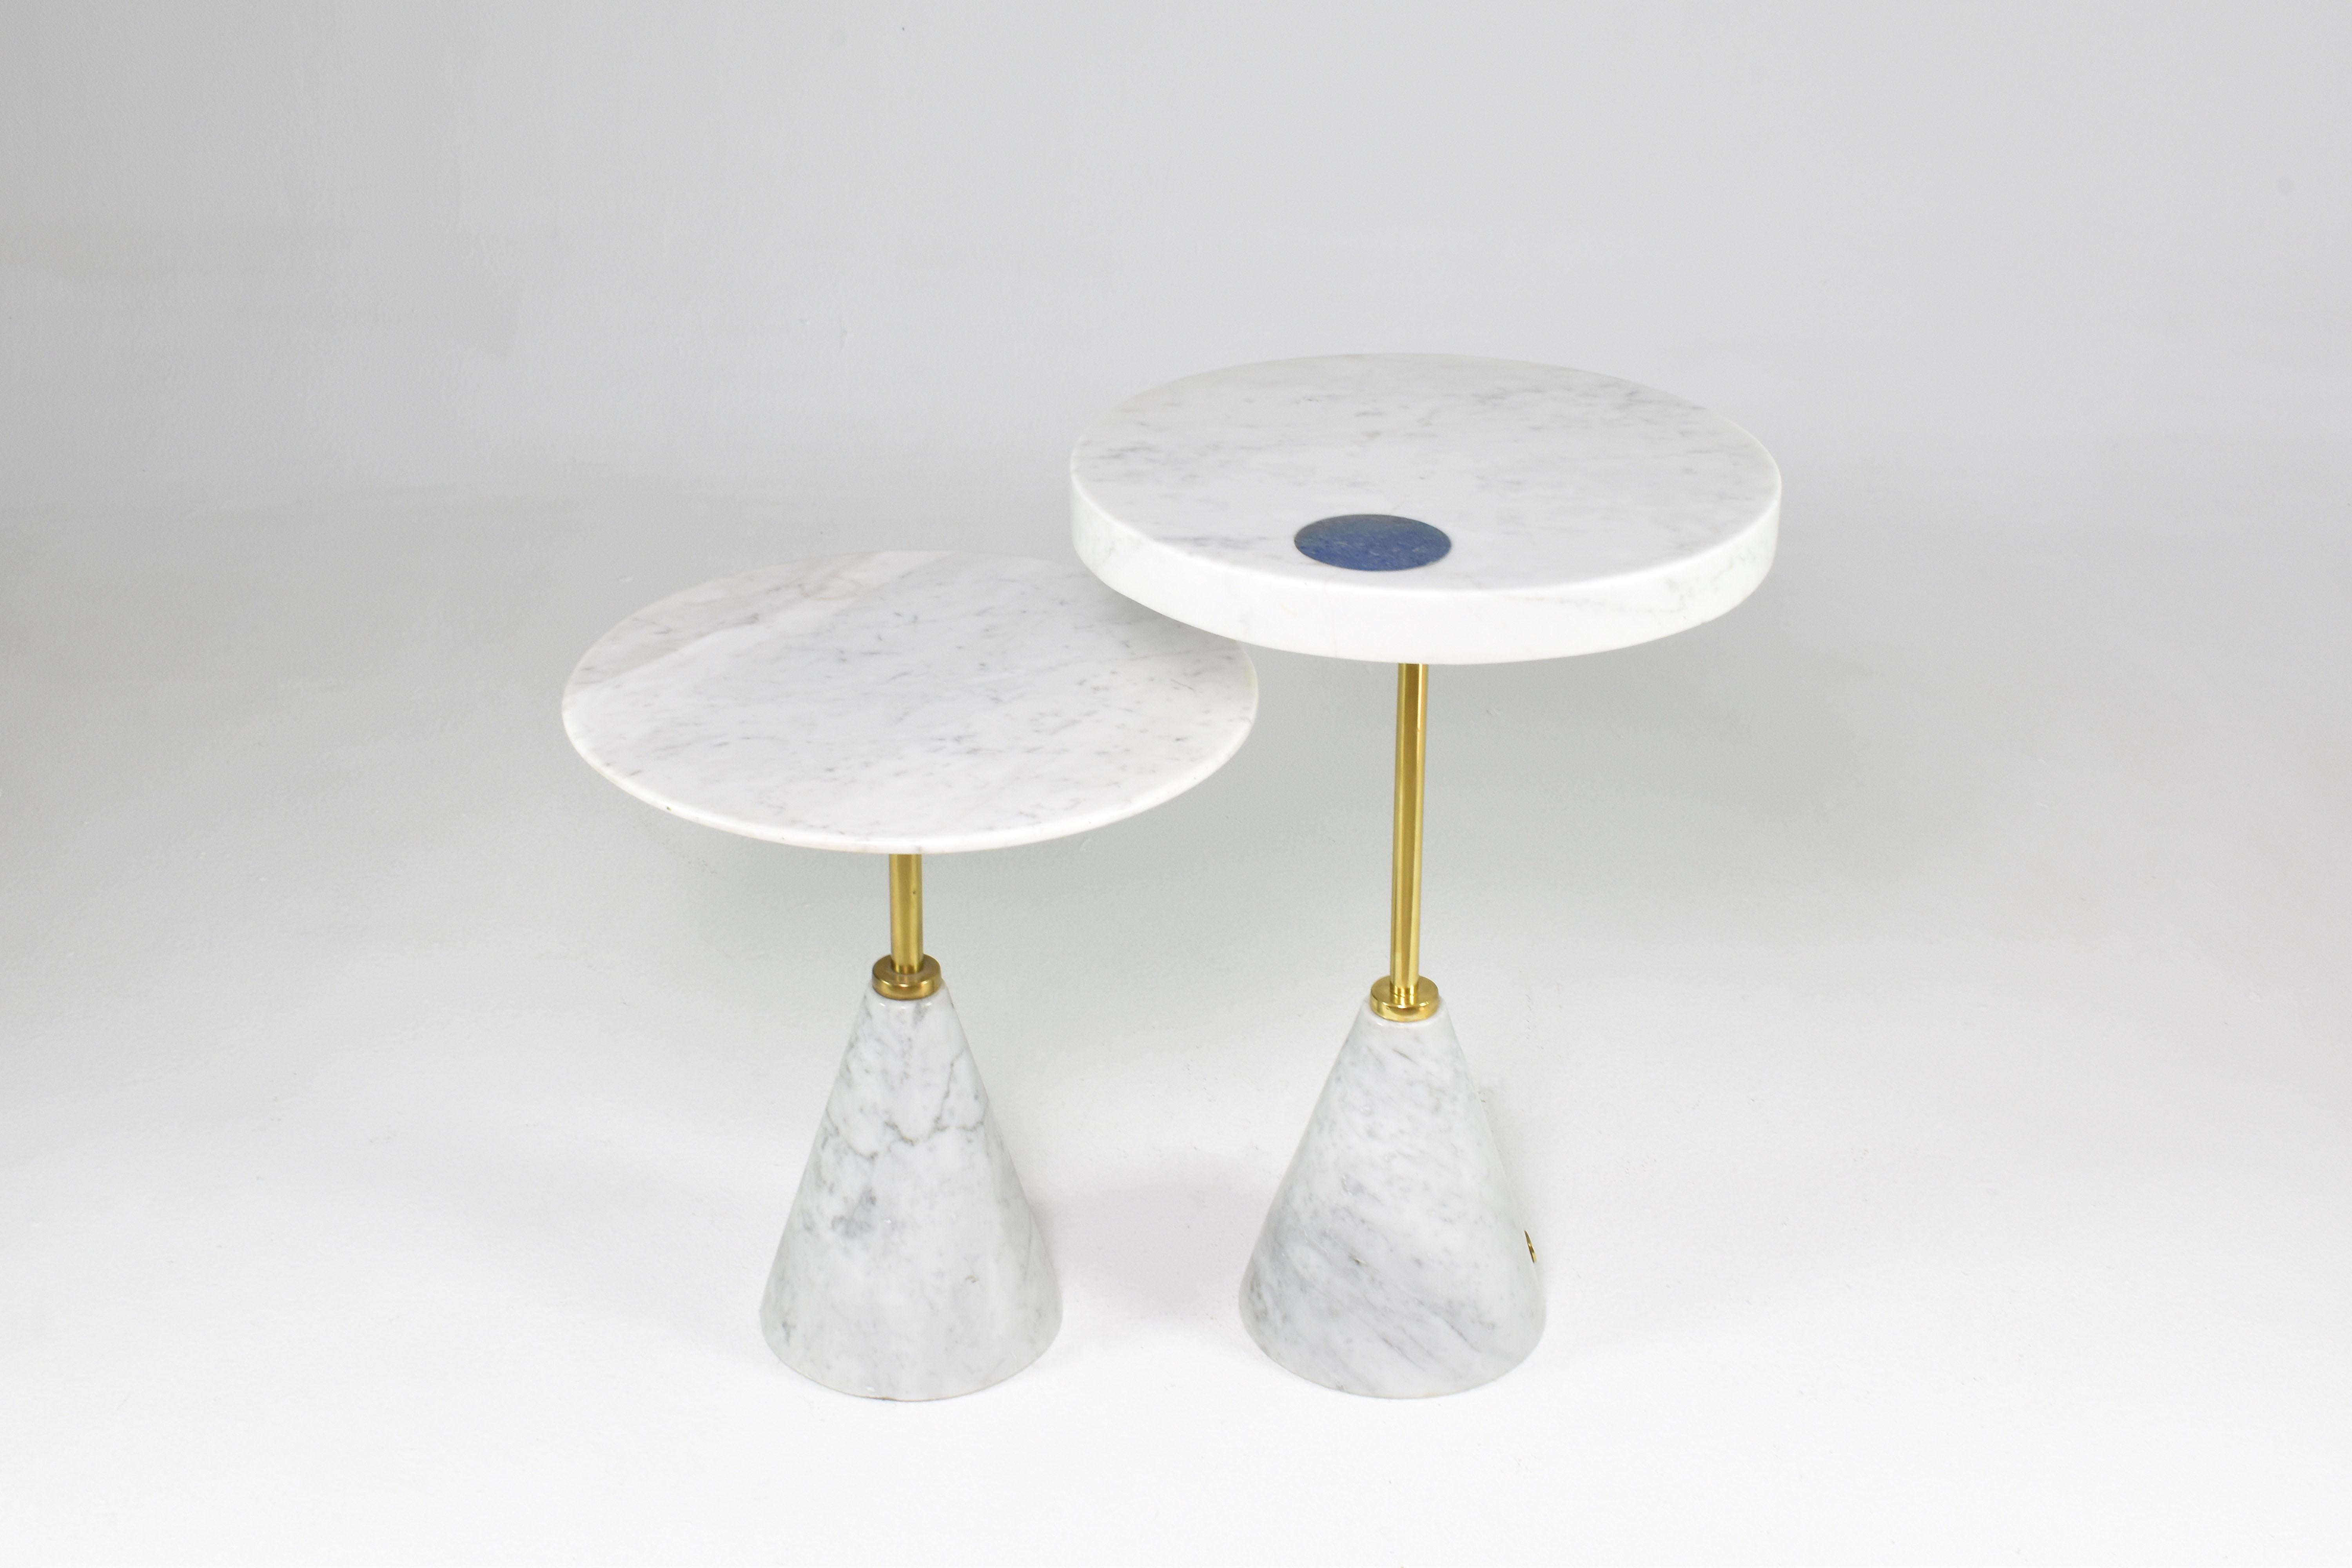 A pair of contemporary gueridon side tables designed by Jonathan Amar handrafted out of Carrare marble and brass. The higher table with the thicker tabletop is adorned with a superb custom lapis lazuli detail. 

These tables are meticulously